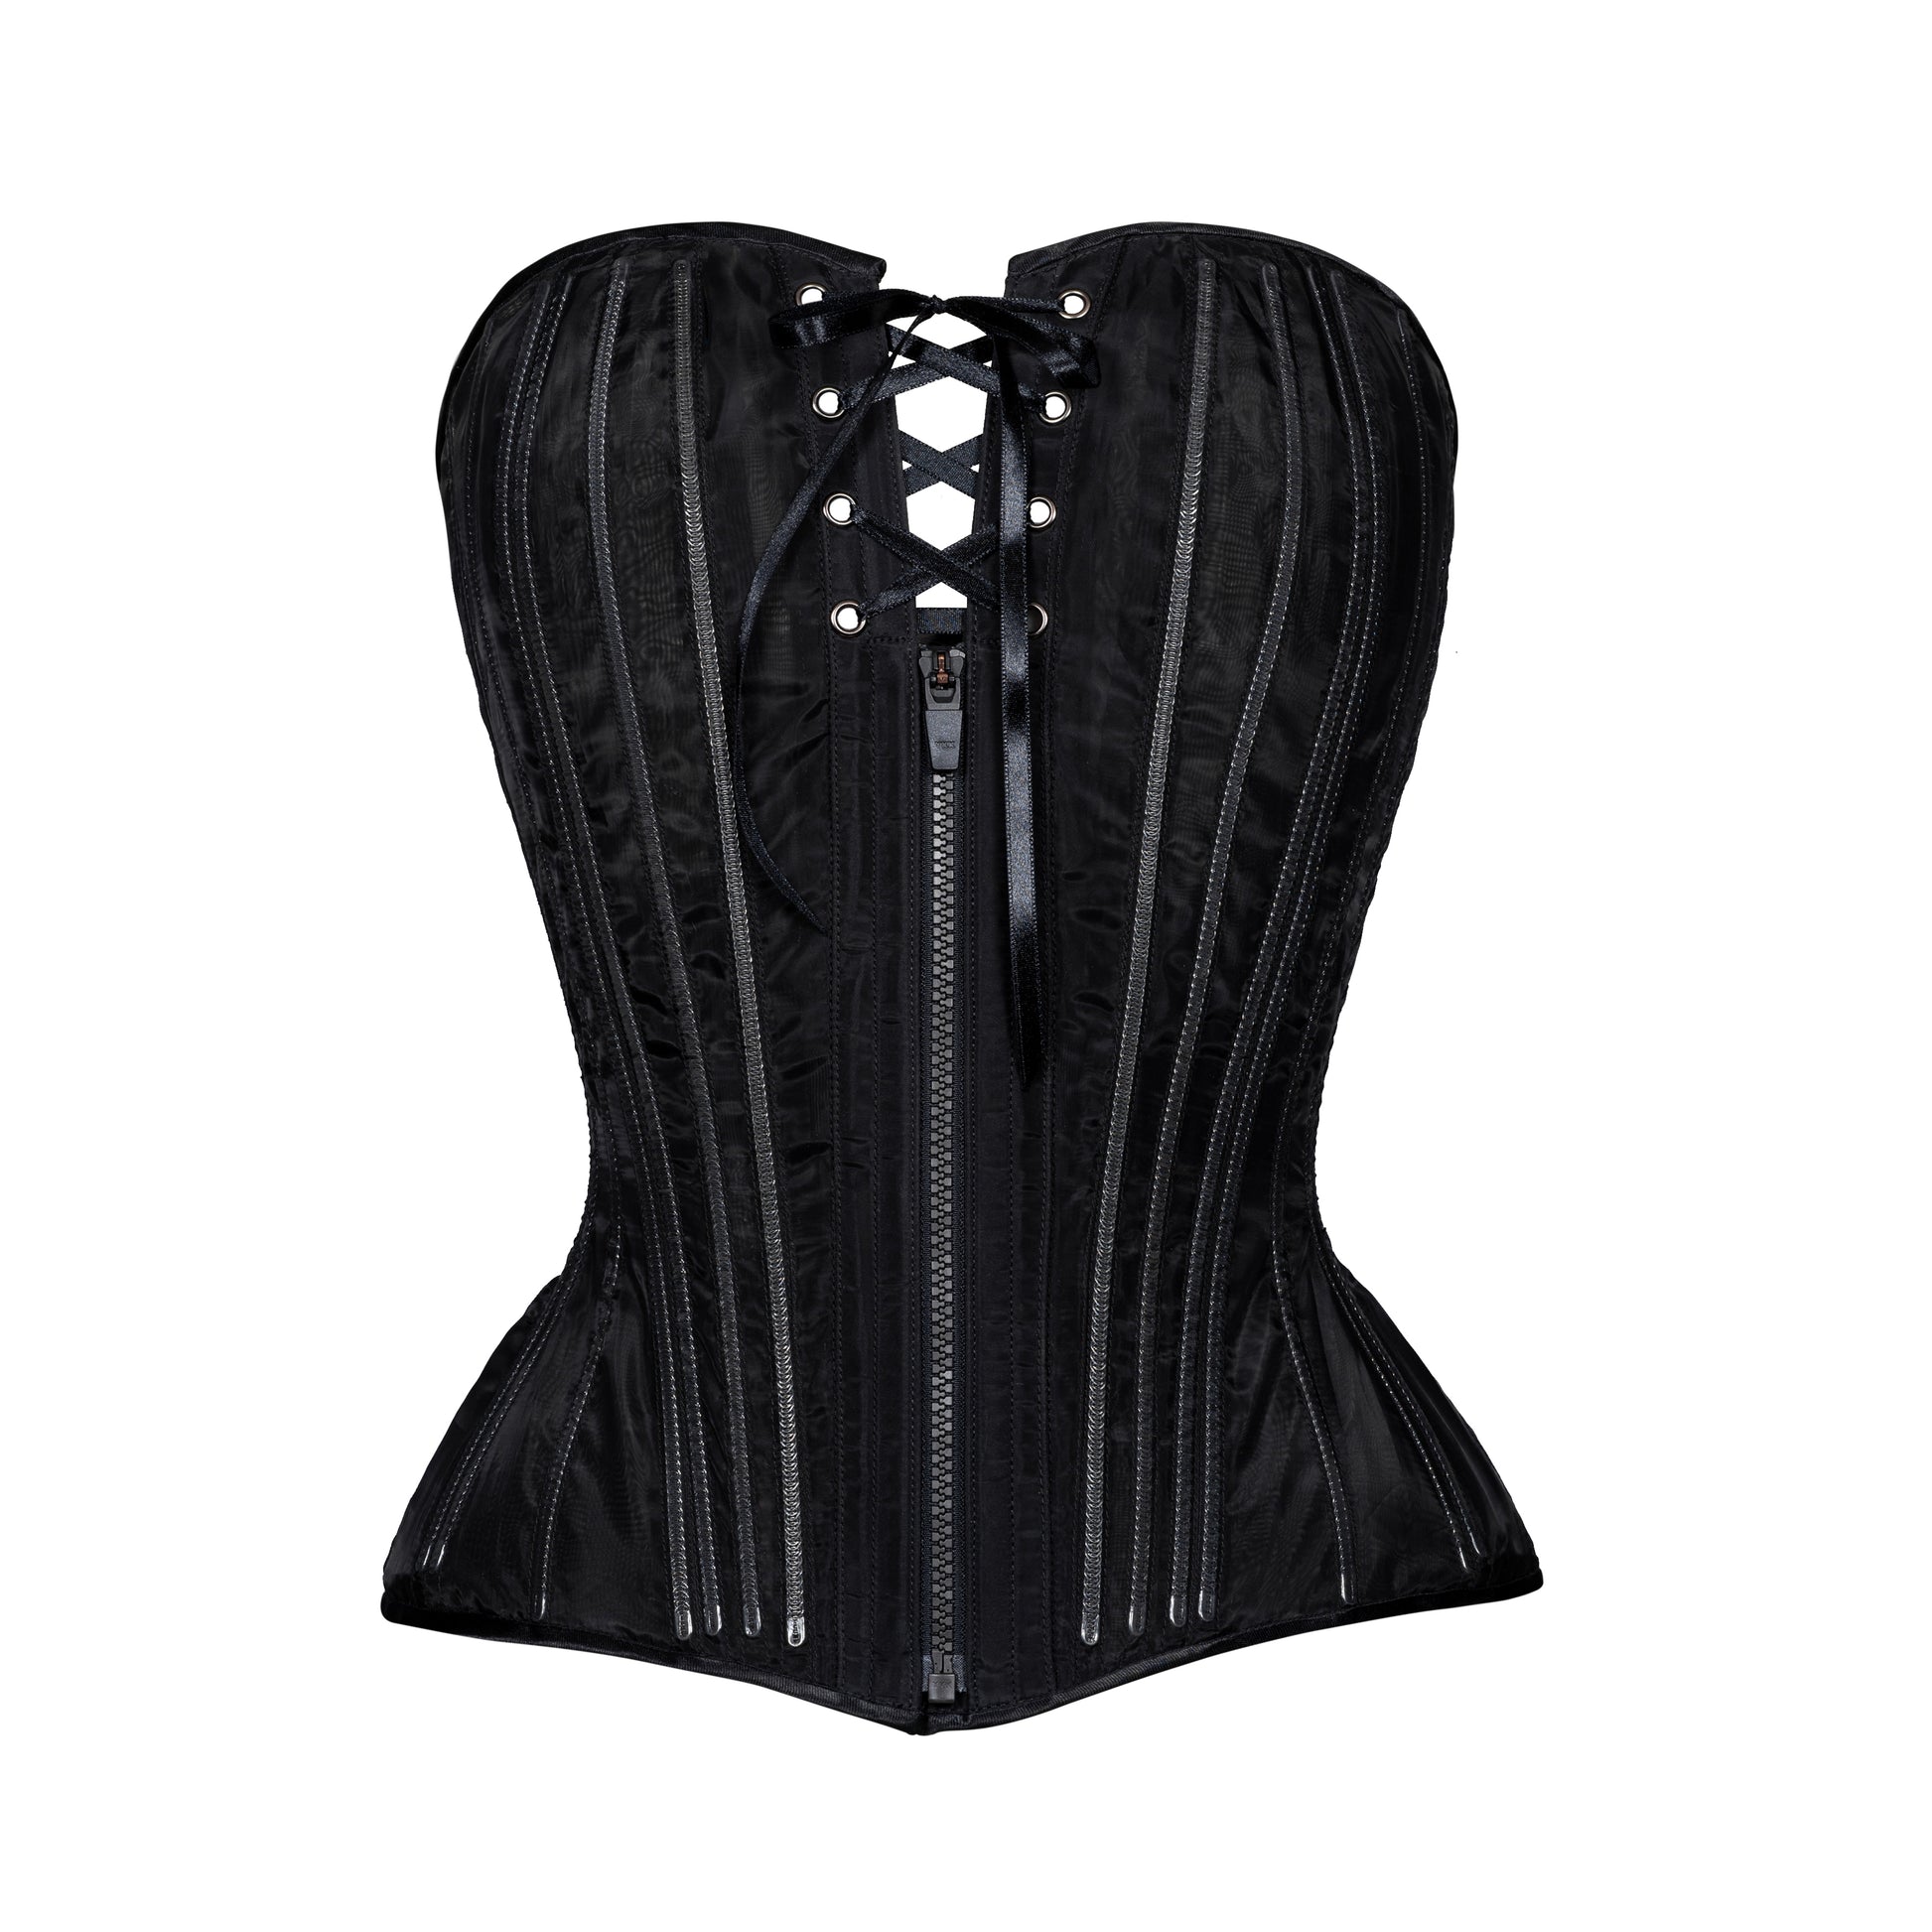 Shop Beautiful and Affordable Designs of Black Satin Corset Here